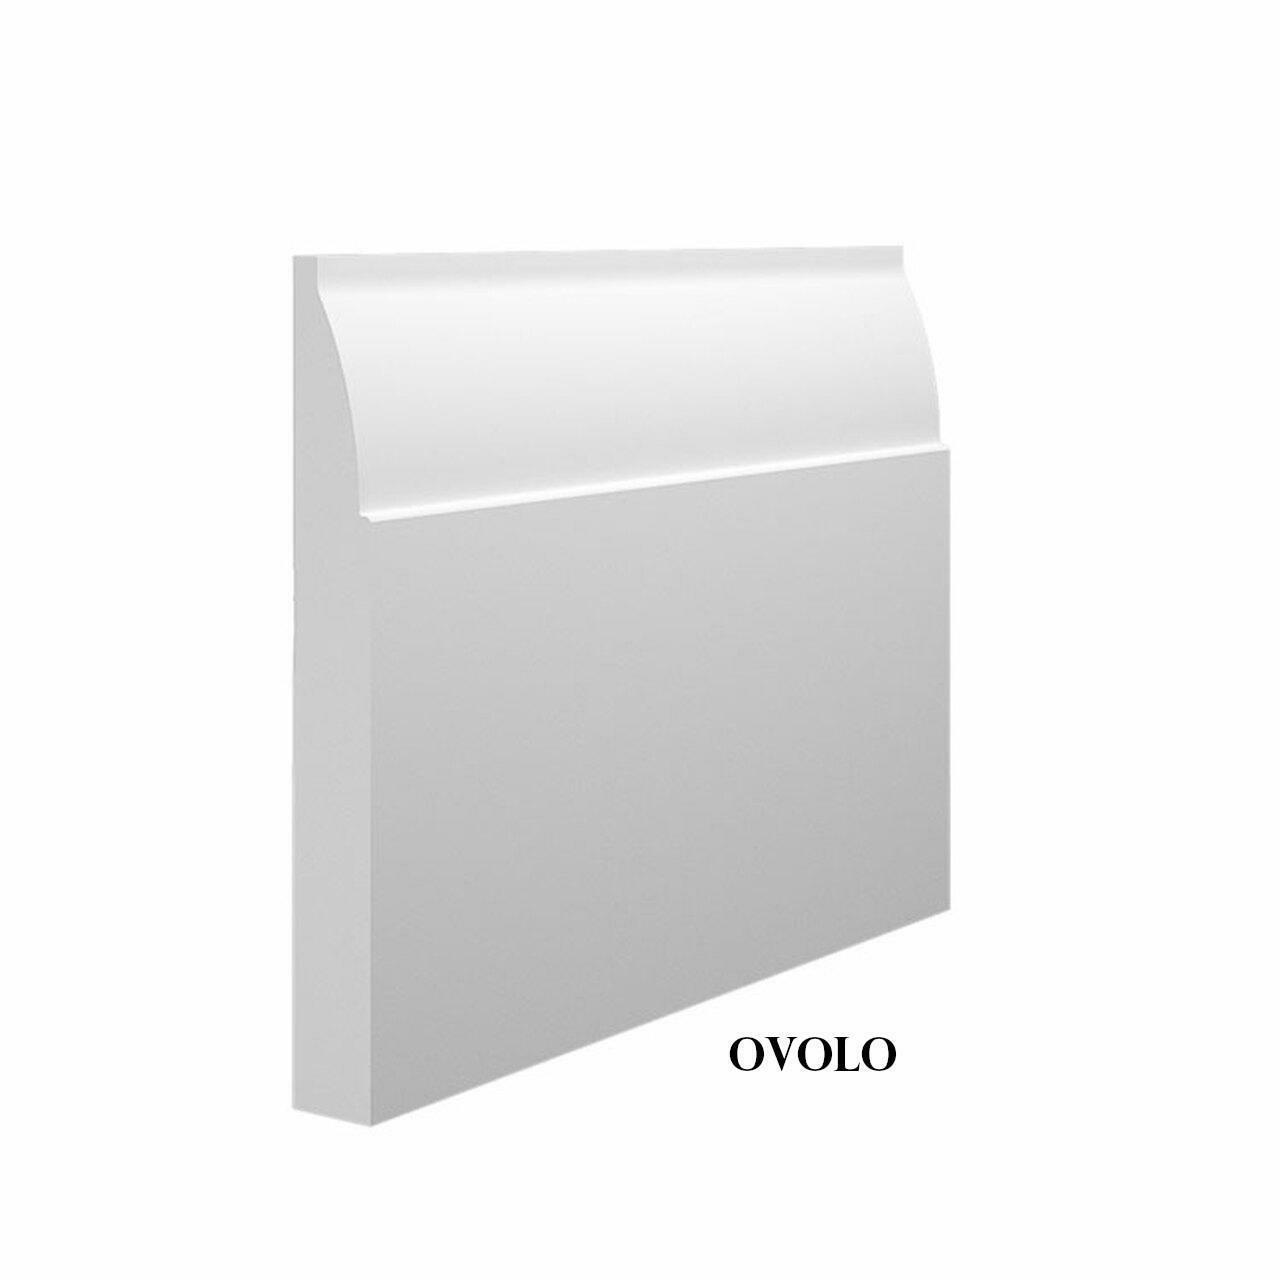 Ovolo - White Primed MDF Skirting & Architrave